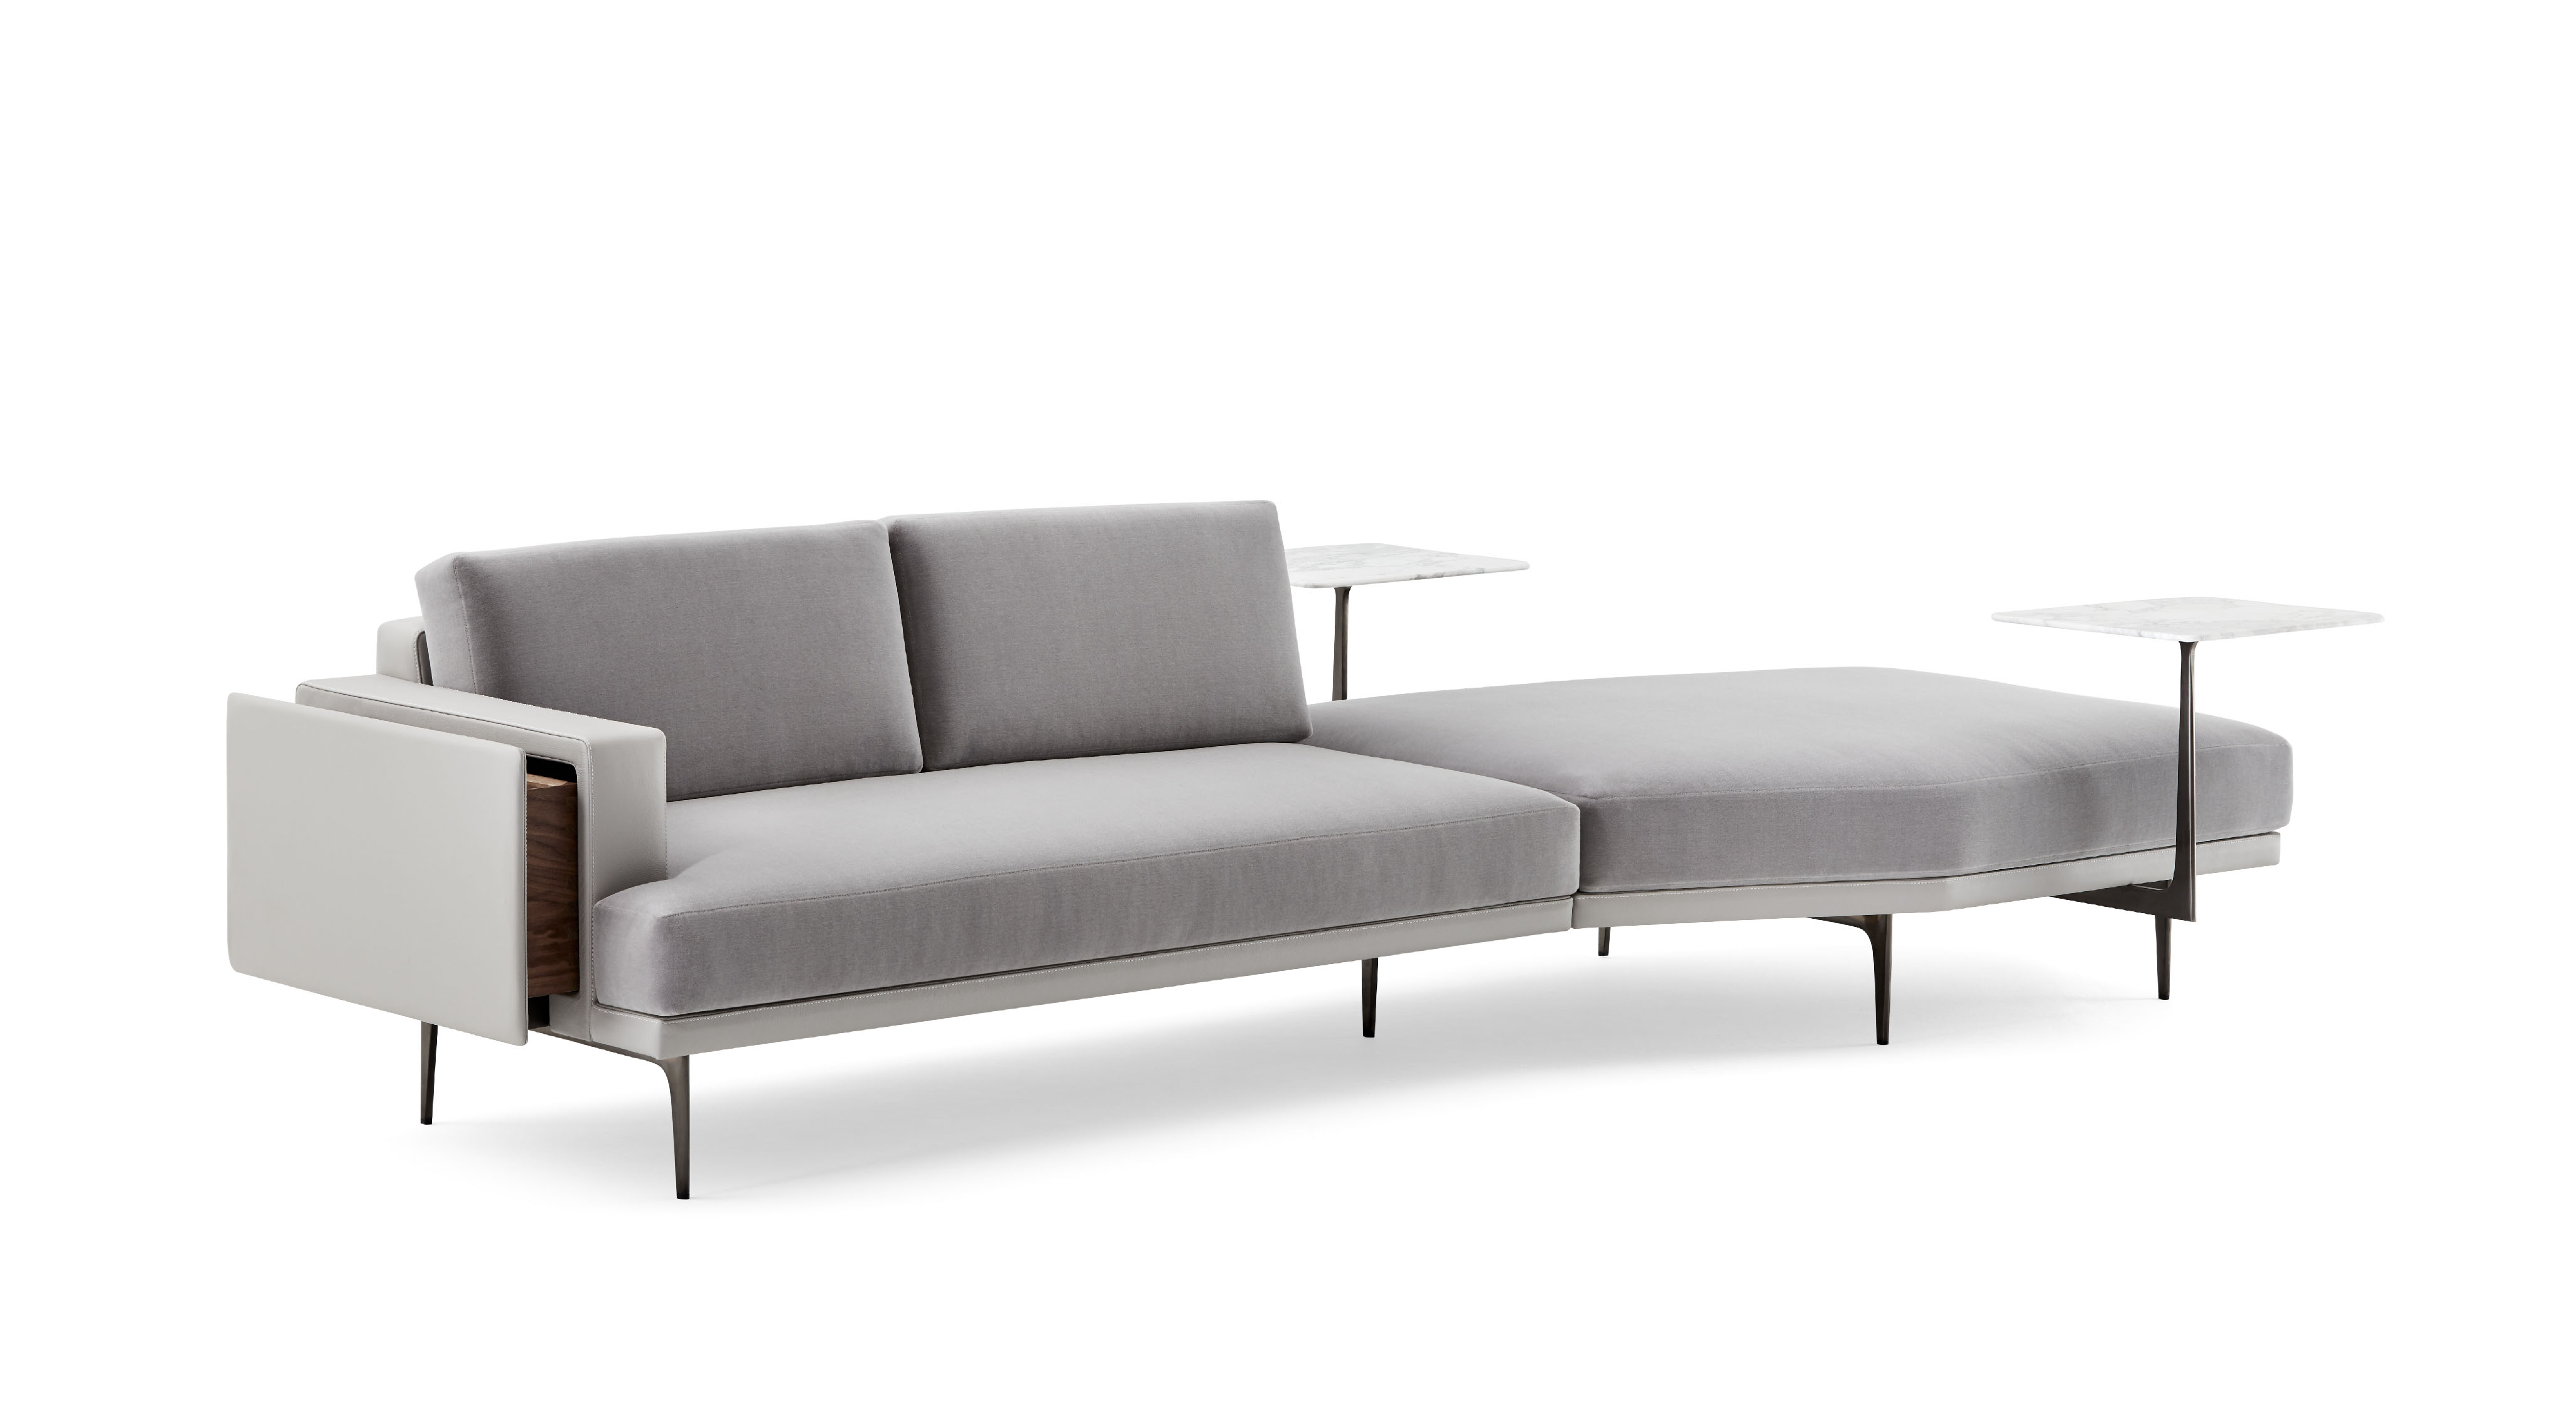 The Lyda sofa designed for Haworth has steel arms and a marble tablet surface